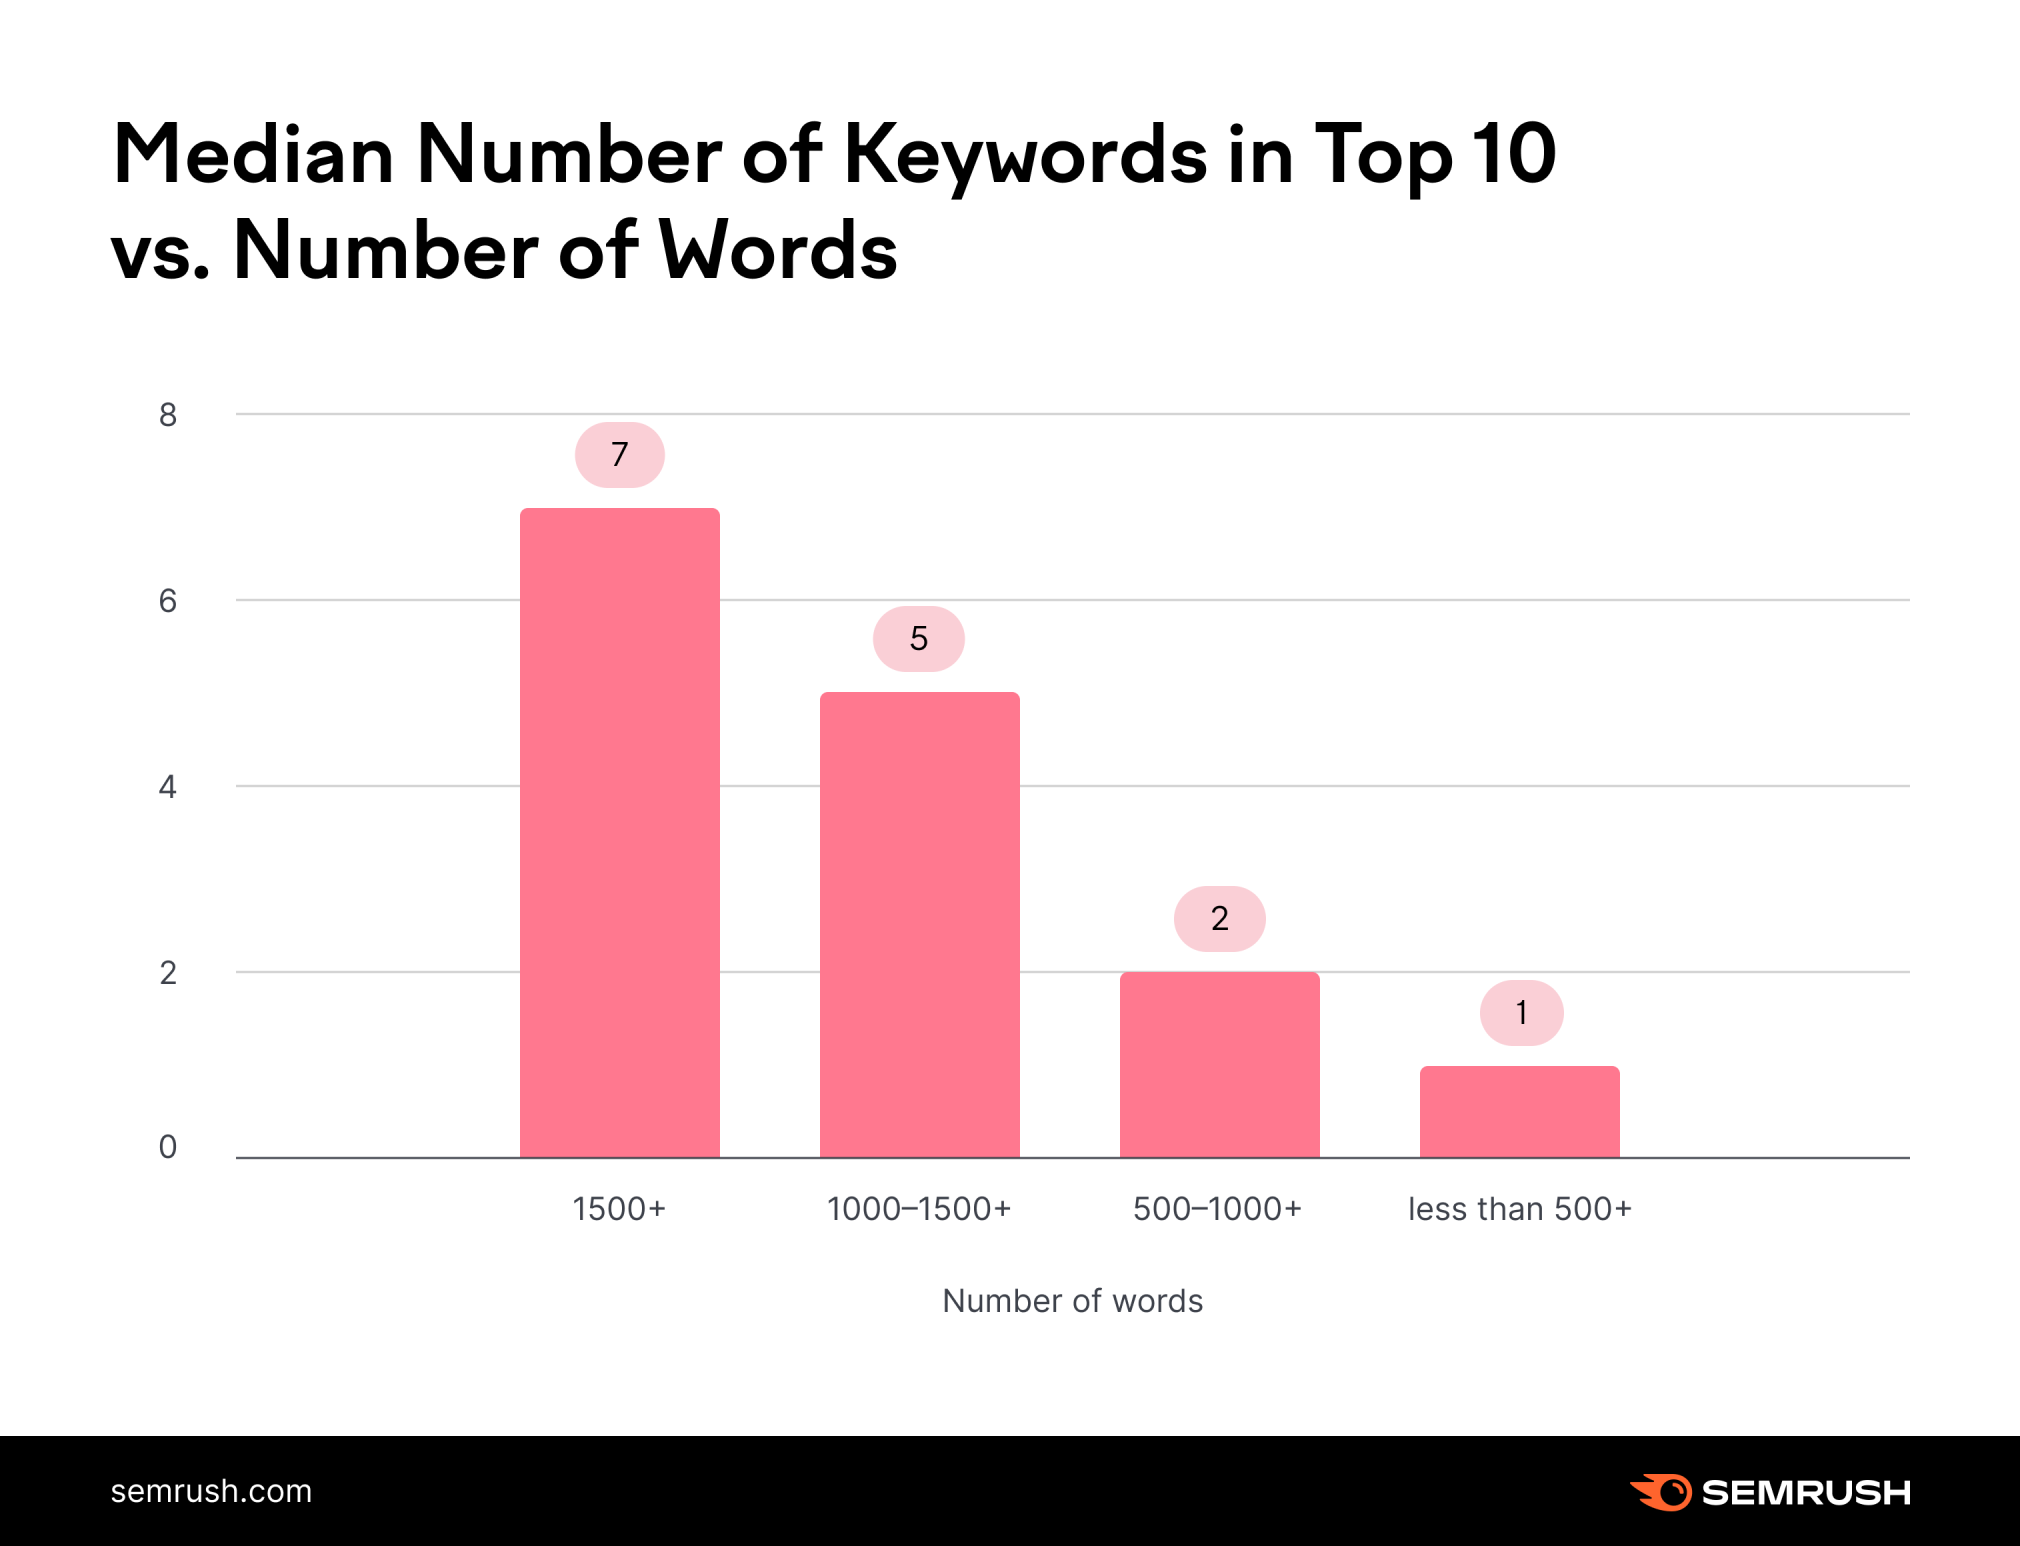 A bar graph from a Semrush SEO study finds that longer articles often ranked for more keywords than shorter content pieces.